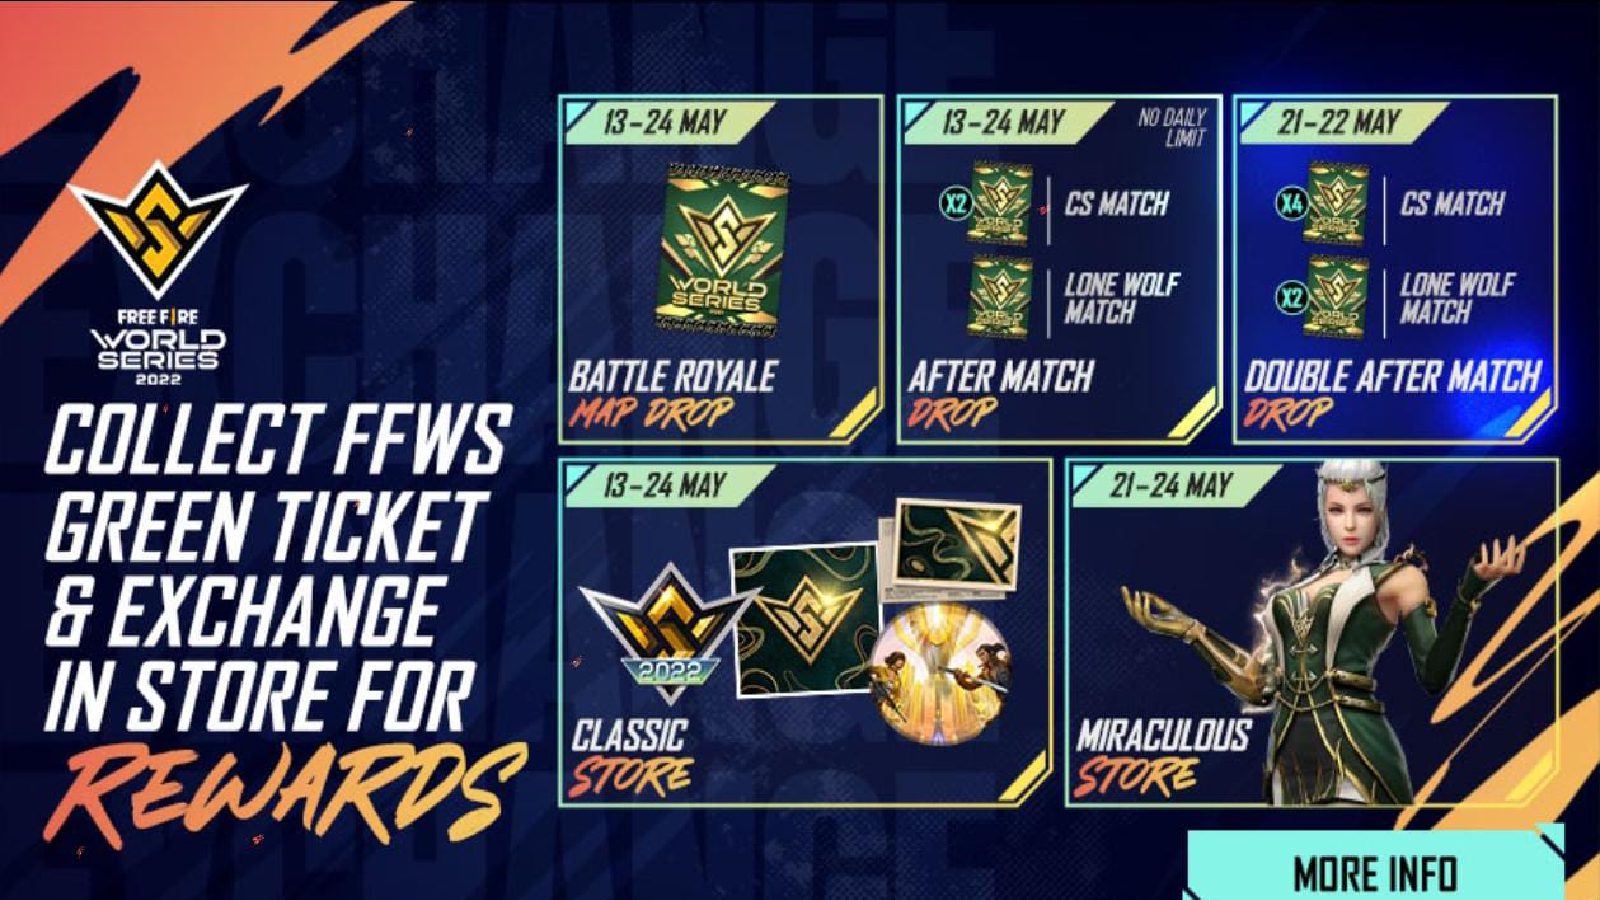 Free Fire FFWS 2022 May event calendar: Miraculous store, FFWS Live watching rewards, and more